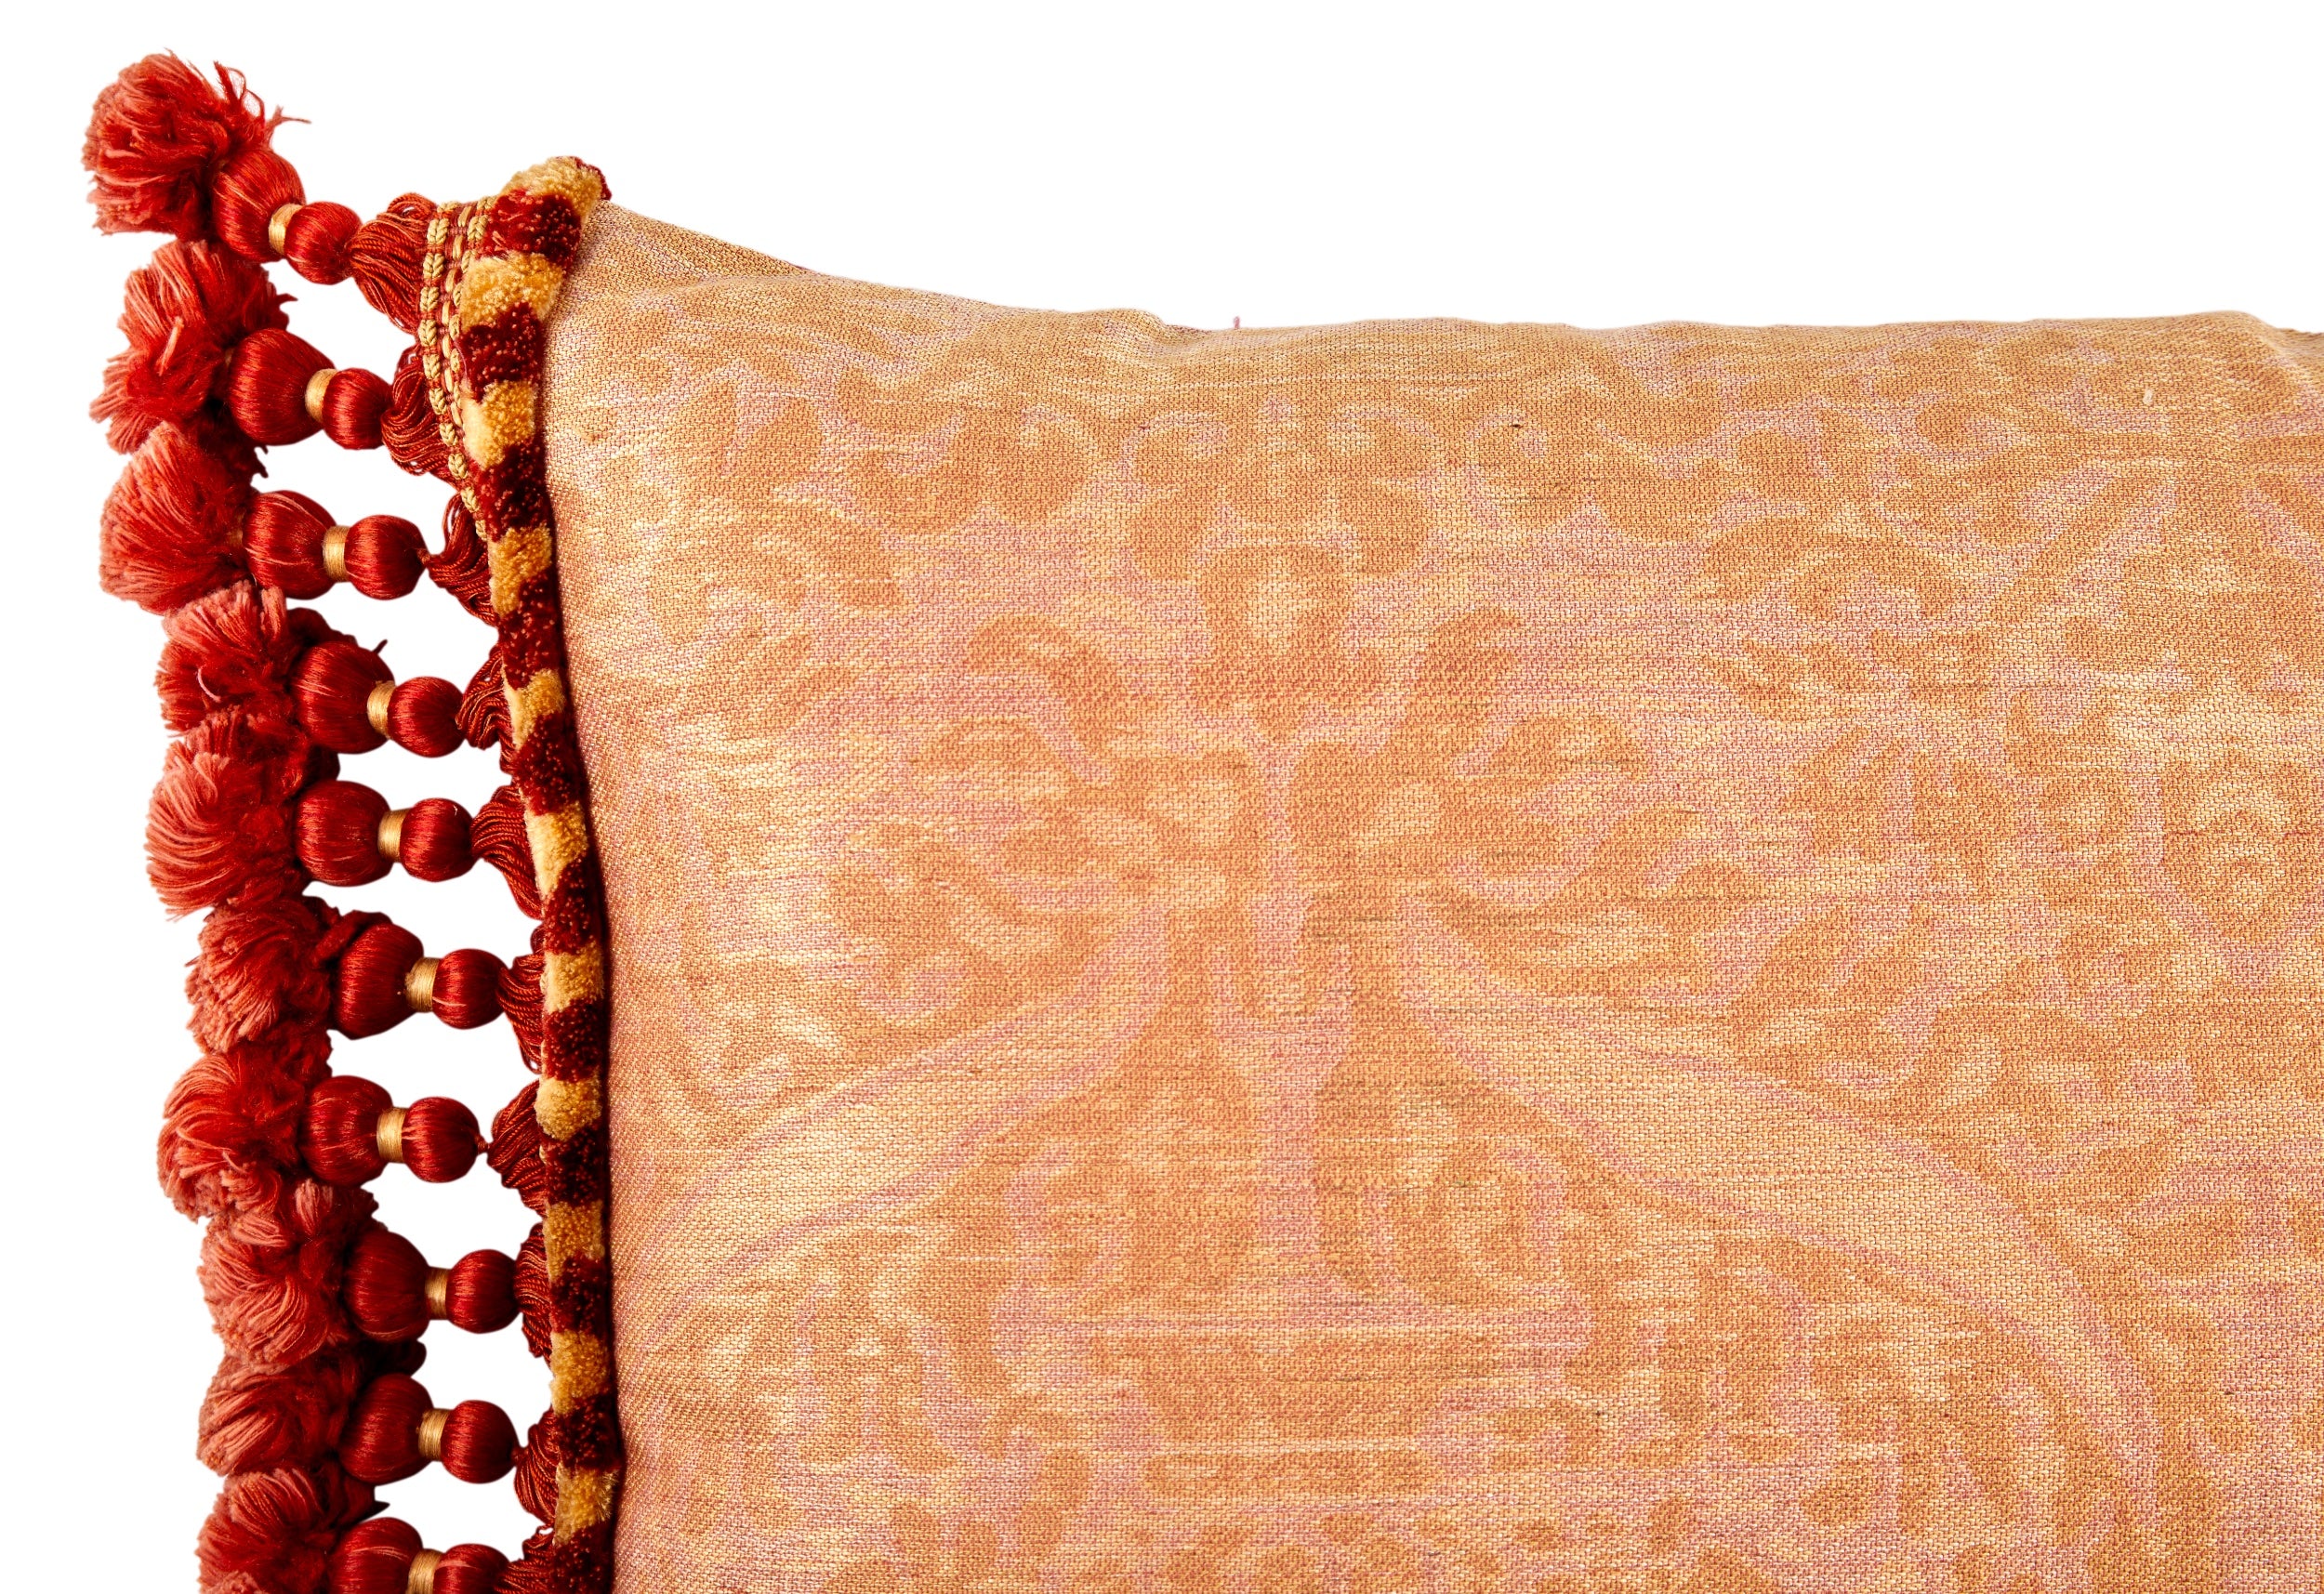 A Cushion made from Early 19th Century Italian Silk Brocade with an Antique Silk Bobble and Tassel Fringe